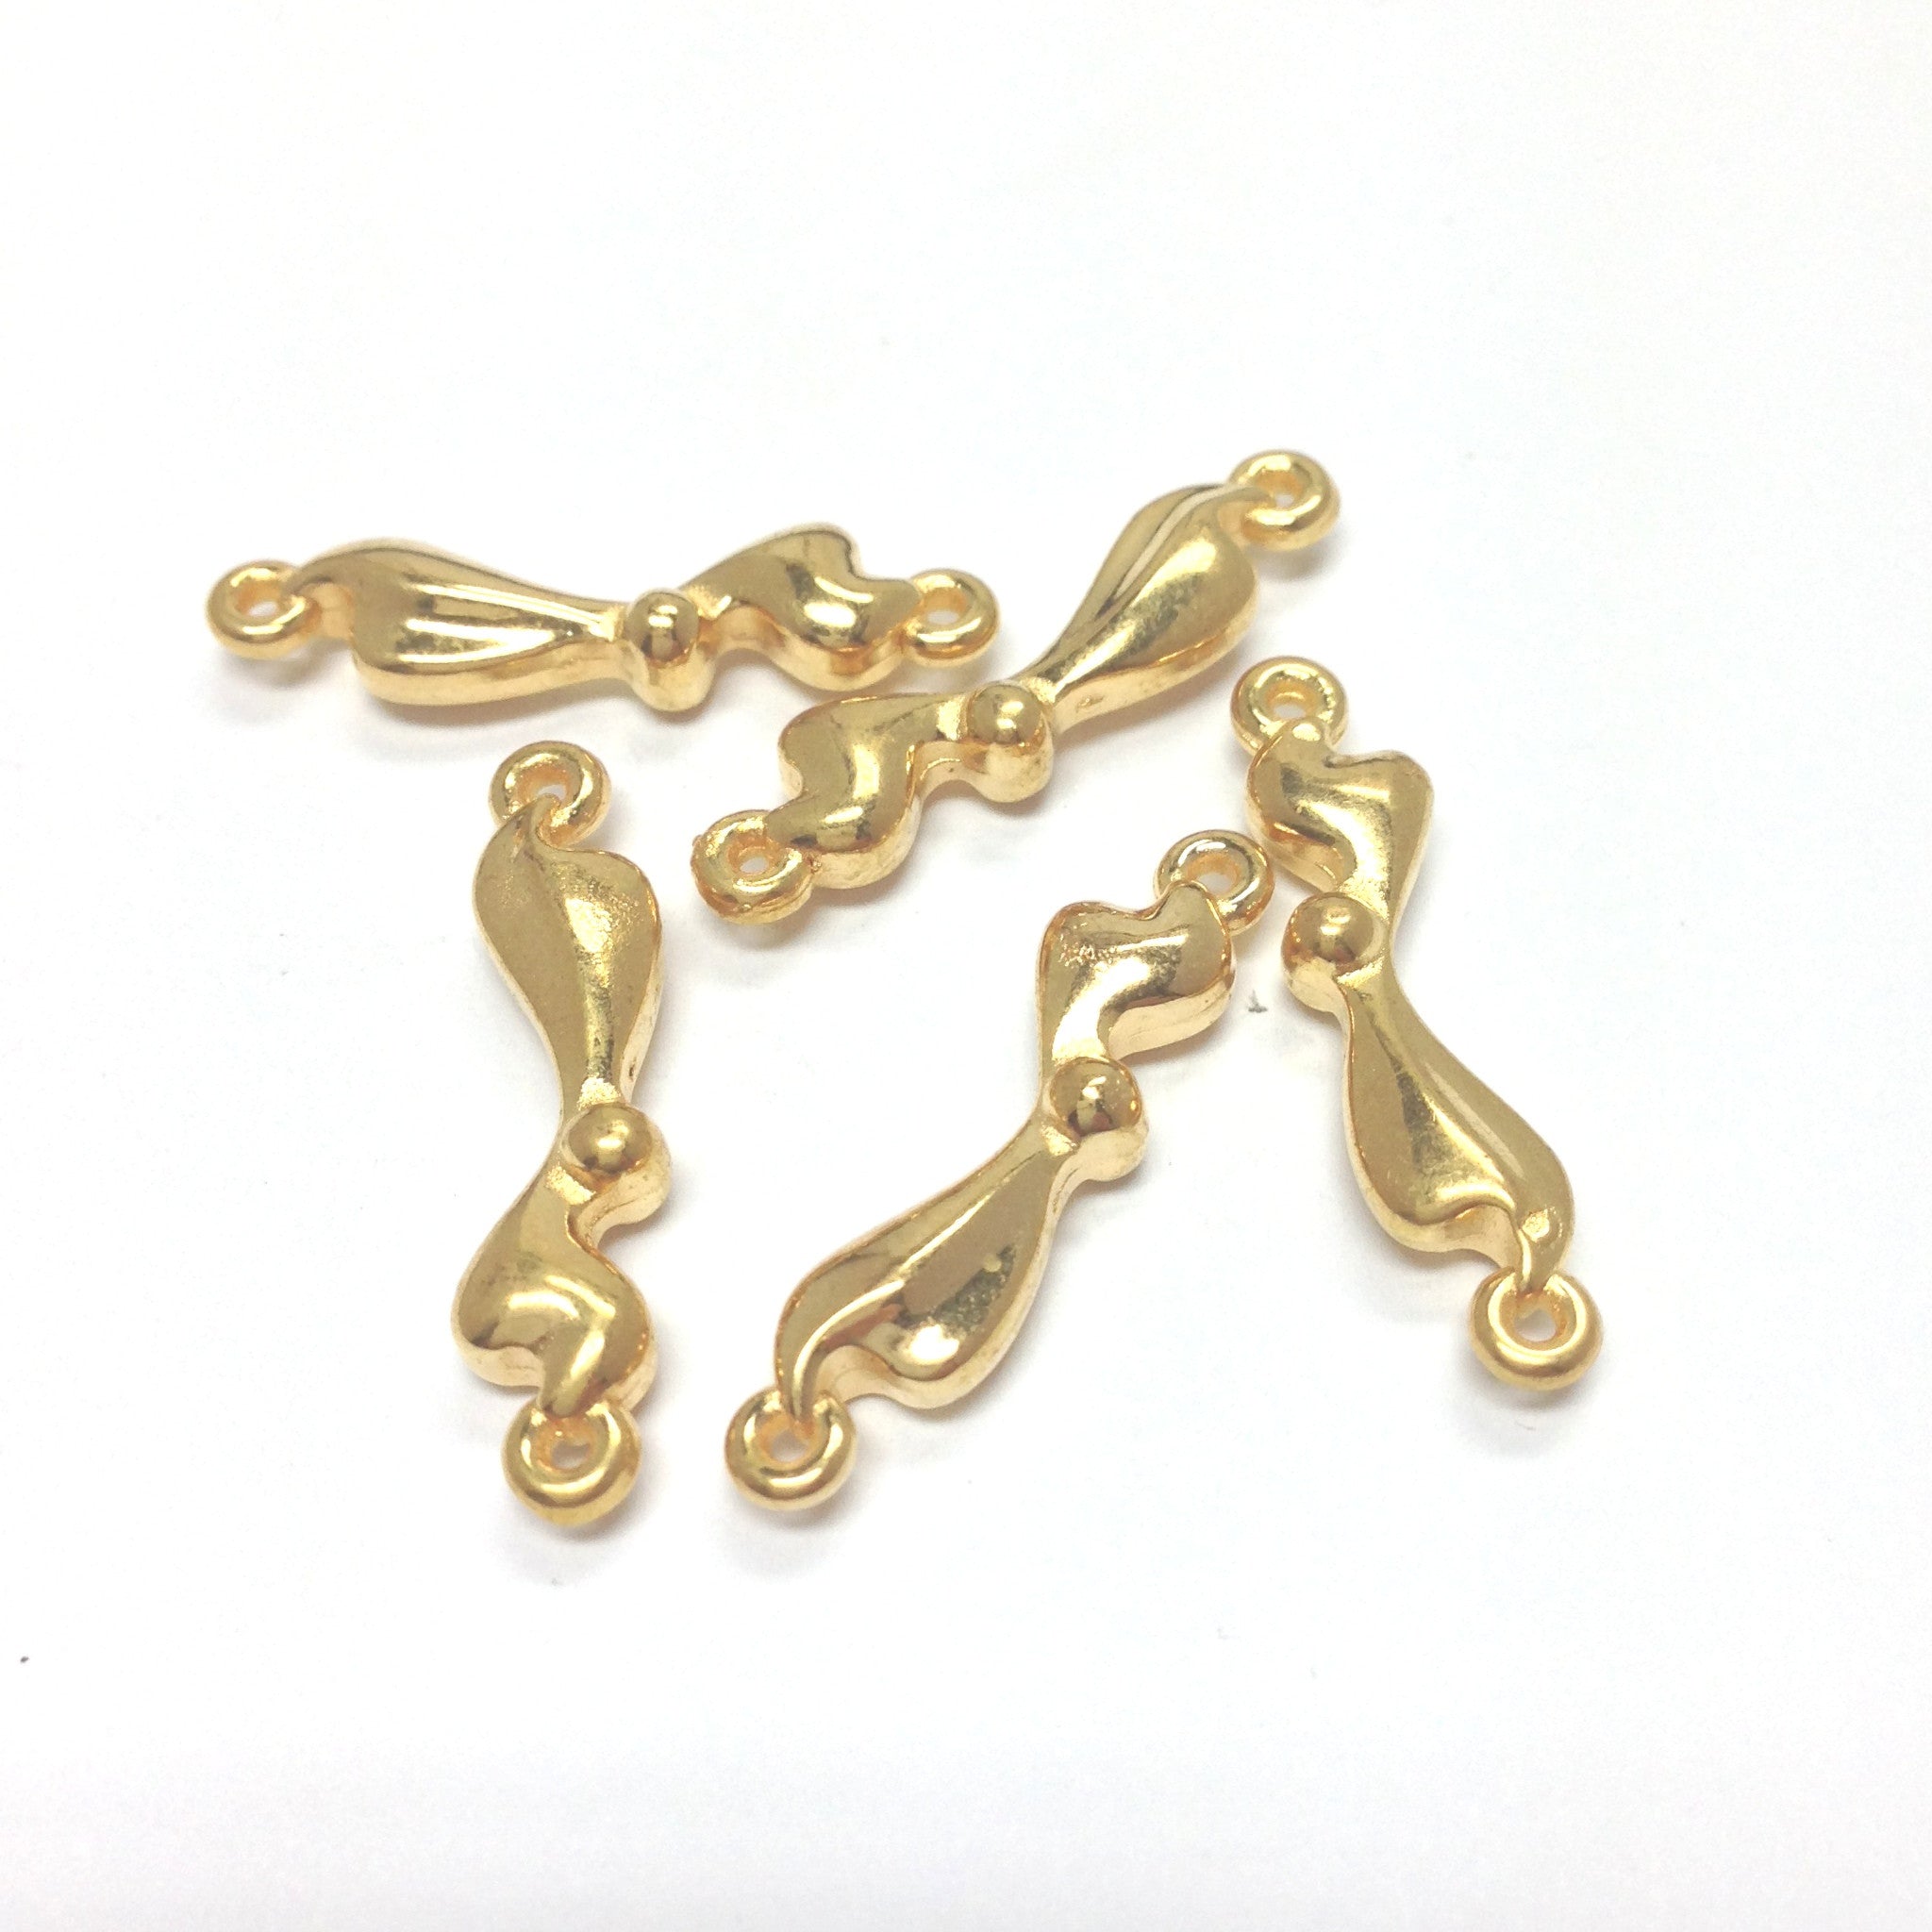 25X6MM Gold Squiggle Link (72 pieces)